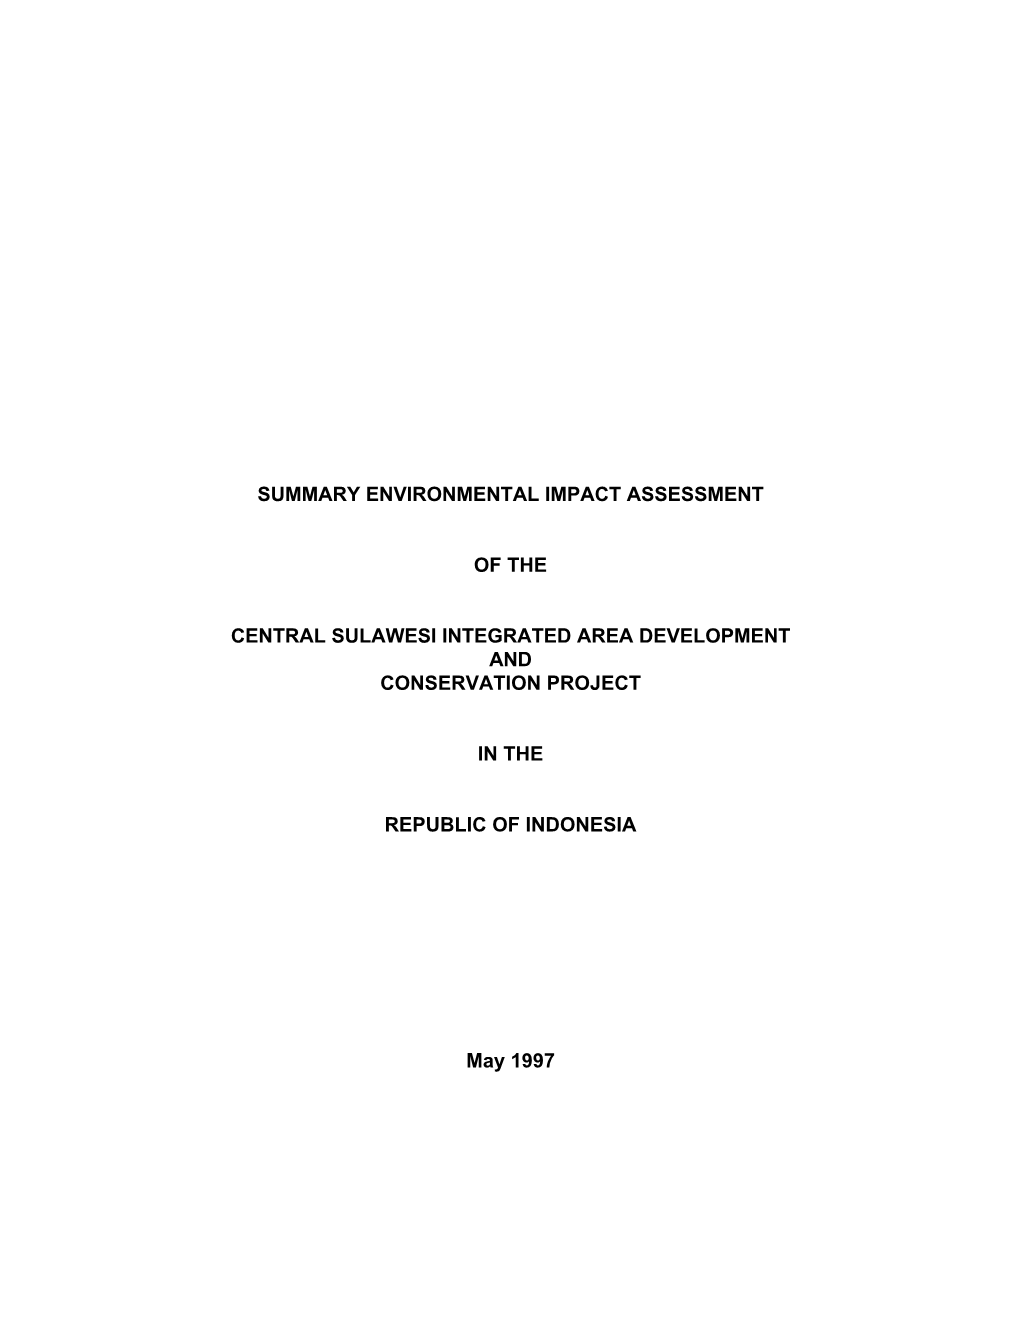 Summary Environmental Impact Assessment of the Central Sulawesi Integrated Area Development and Conservation Project in the Repu